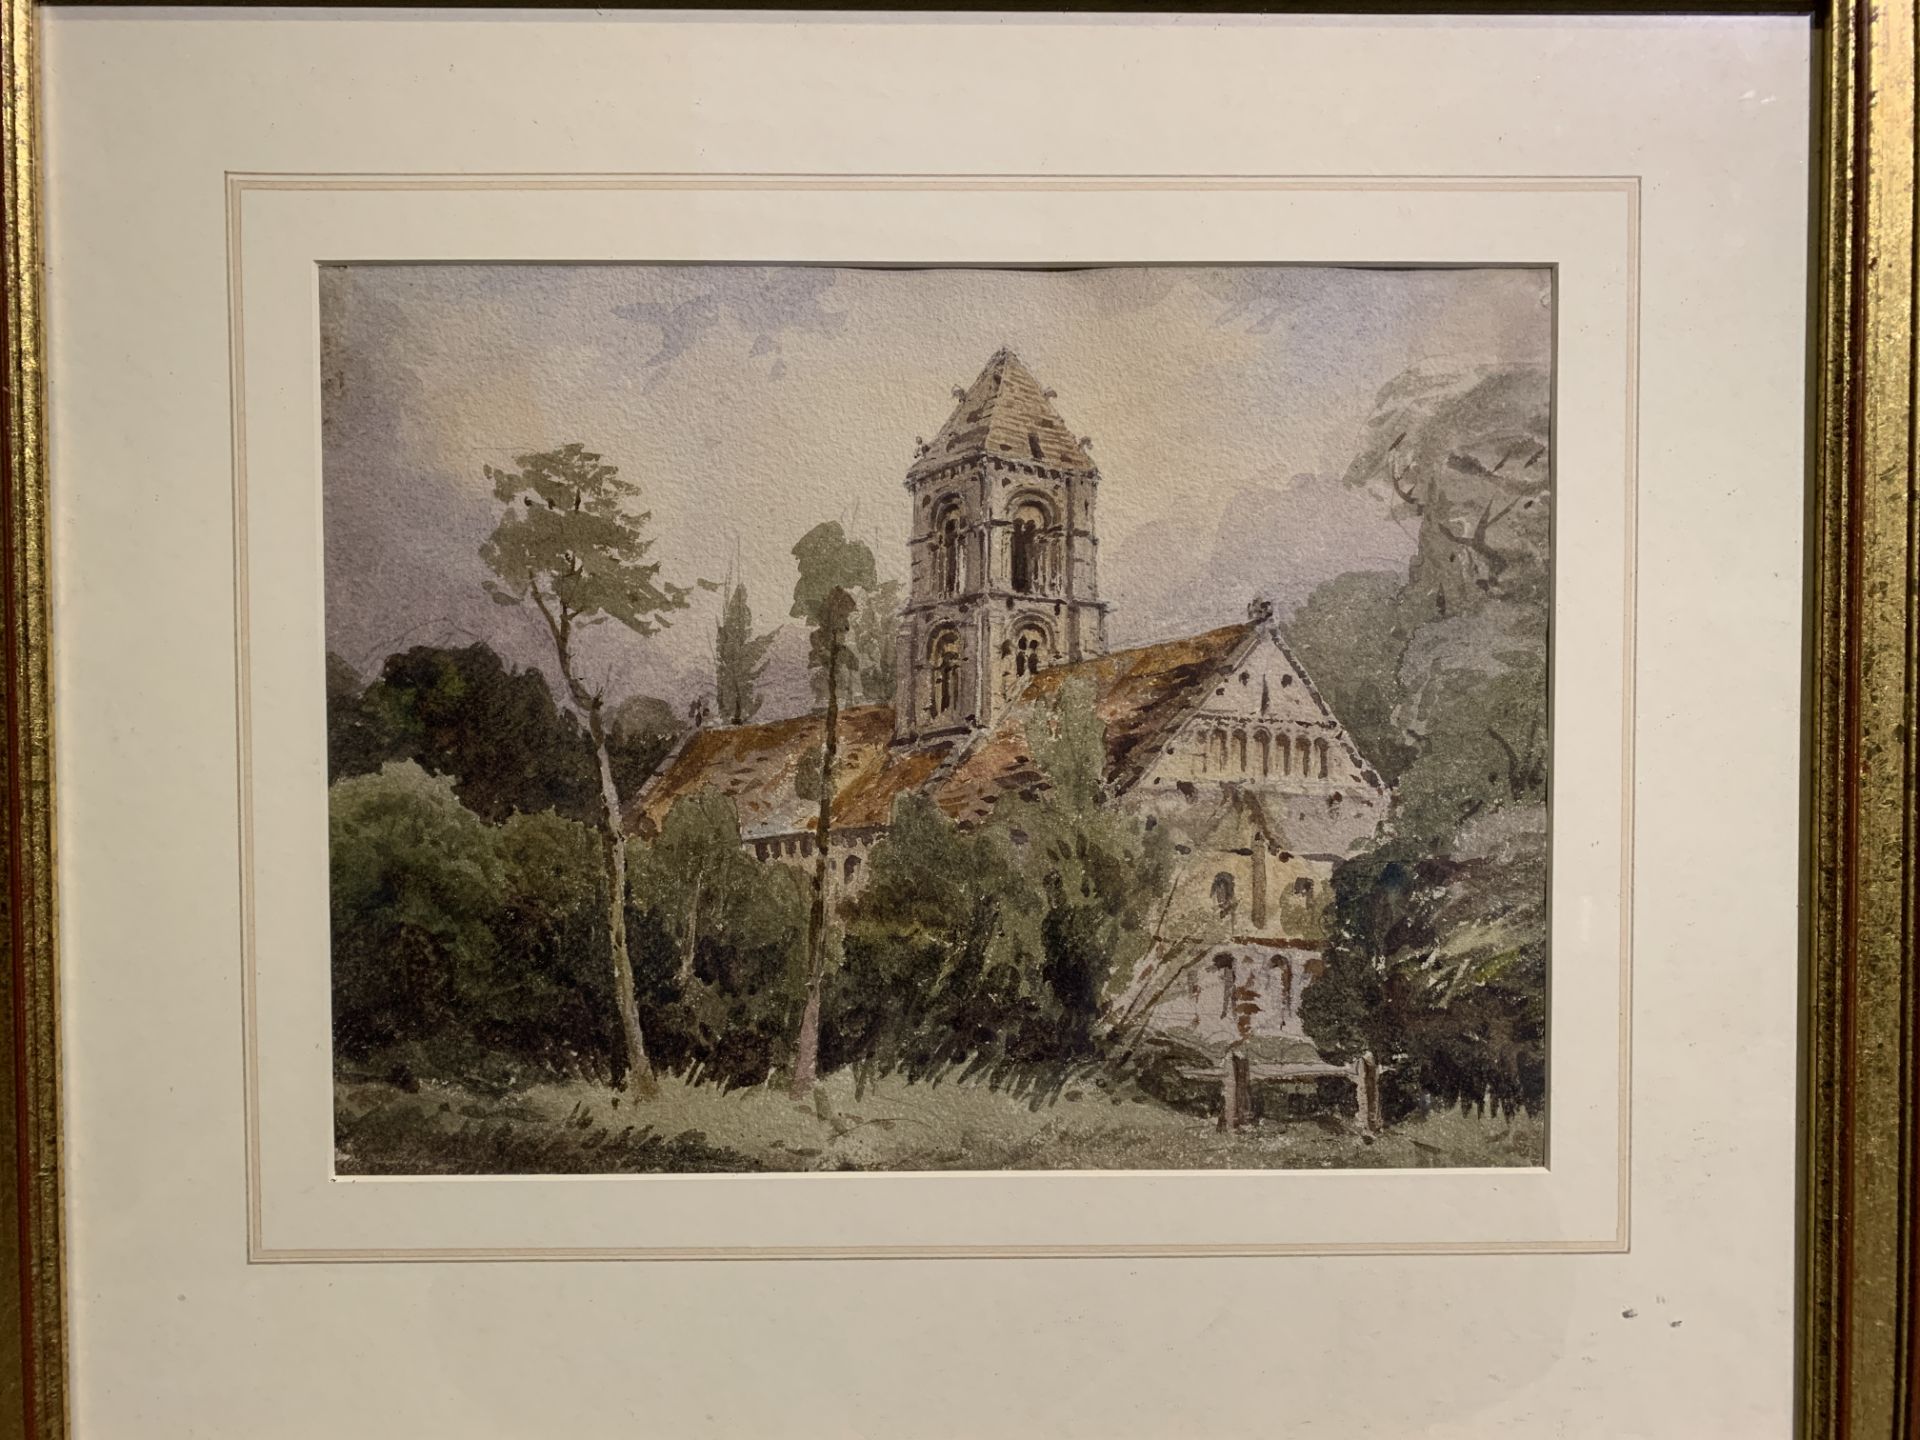 Framed and glazed watercolour "Romanesque Abbey in France" by John Louis Petit - Image 2 of 3